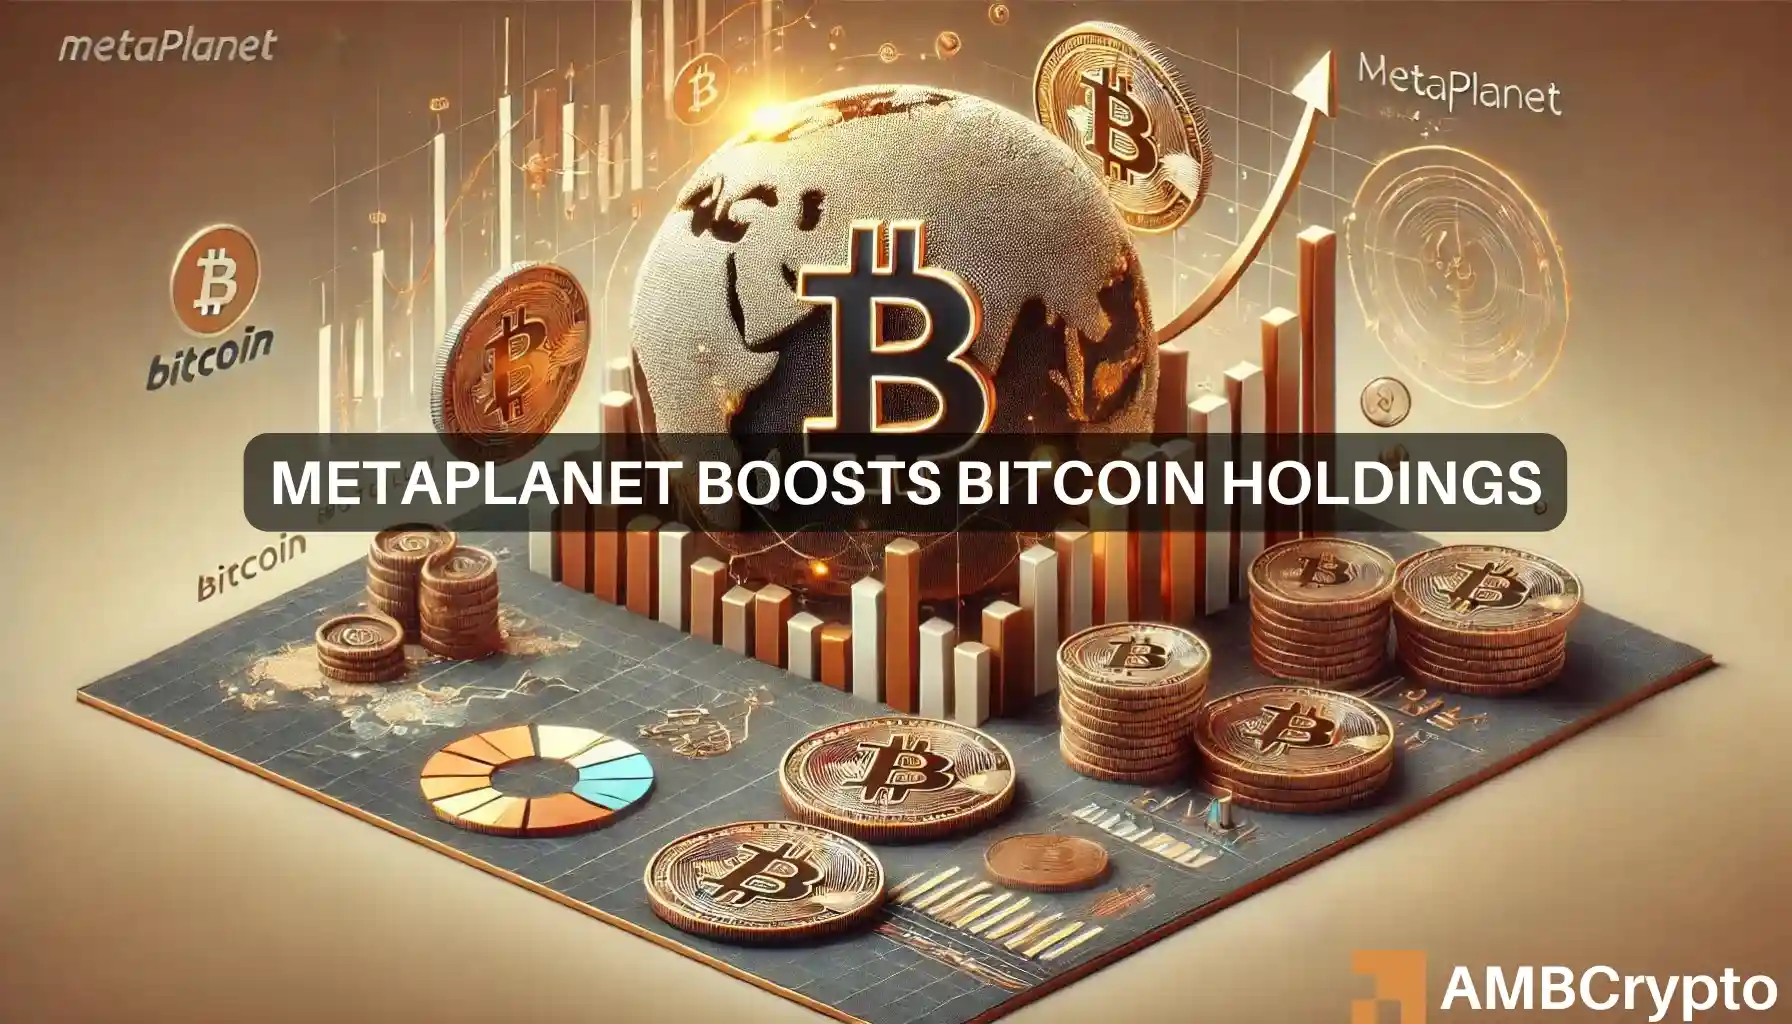 Metaplanet boosts Bitcoin holdings